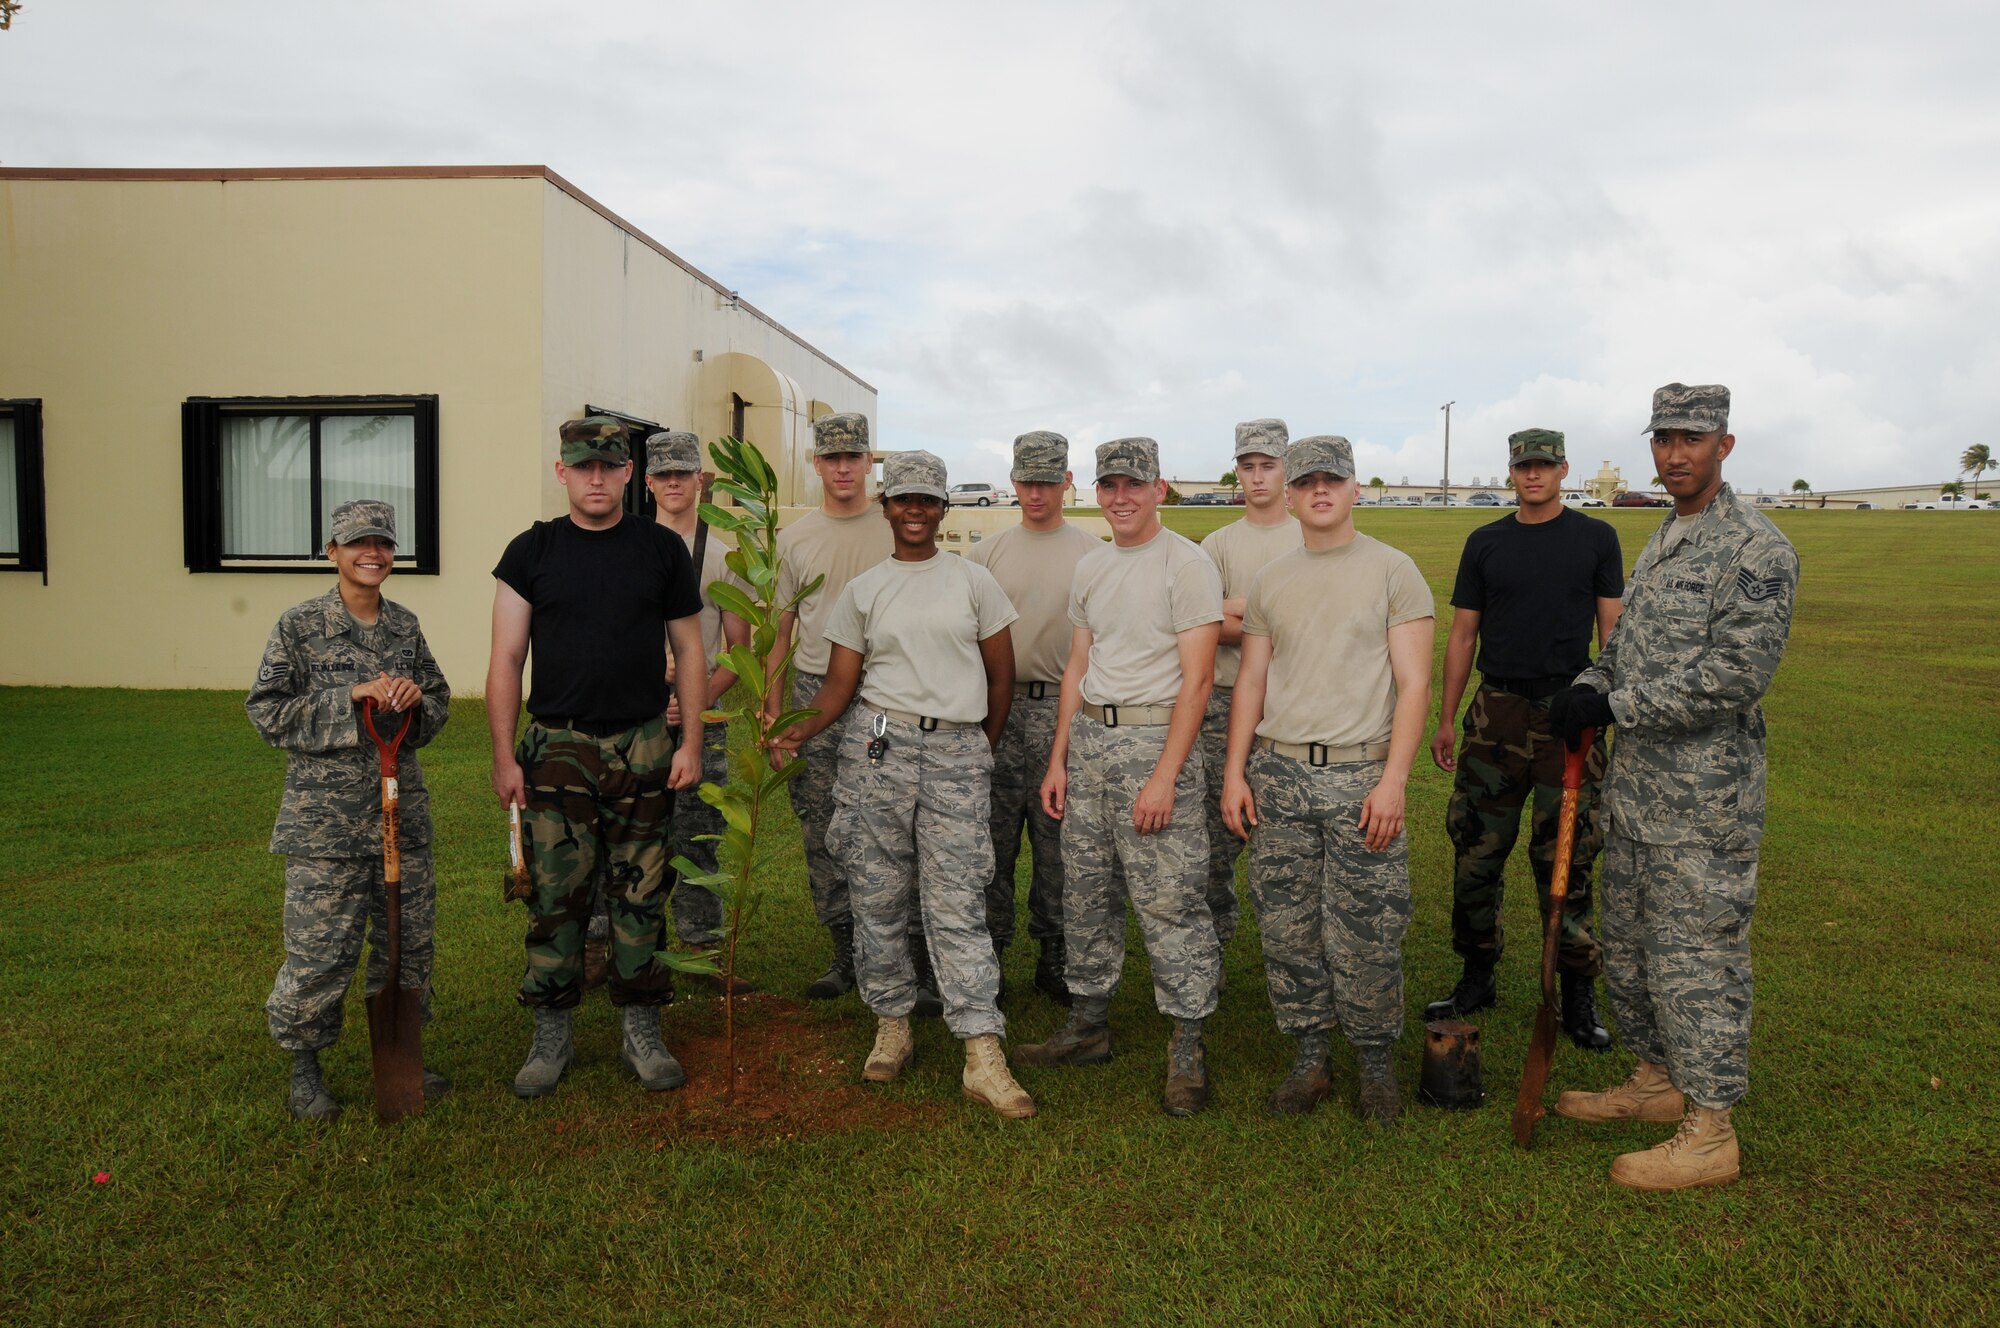 ANDERSEN AIR FORCE BASE, Guam -The First Term Airmen led by instructors, Staff Sgt. Curt Mitchell and Staff Sgt. Yelida Del Valle Ruiz pose for a group photo after planting two trees in font of the First Term Airman Center. (U.S. Air Force photo by Senior Airman Nichelle Griffiths)